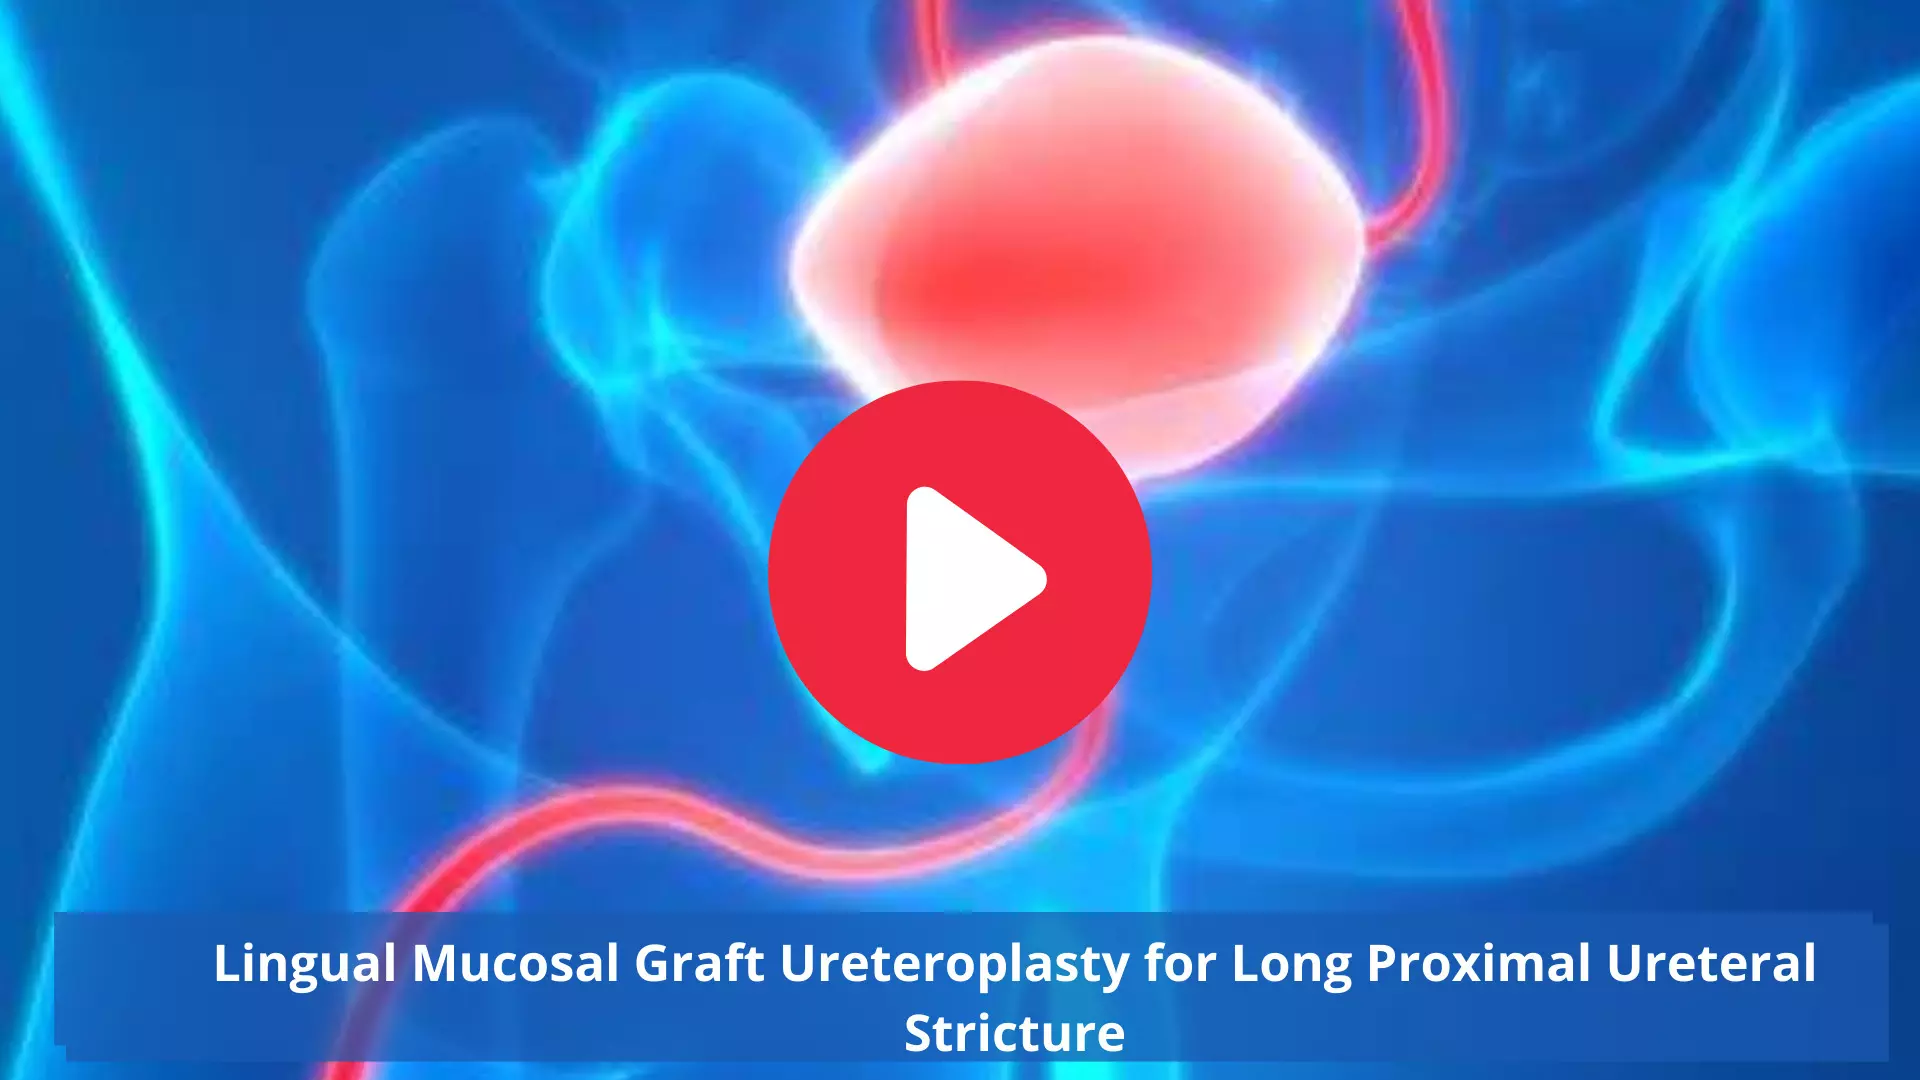 Lingual Mucosal Graft Ureteroplasty for Long Proximal Ureteral Stricture